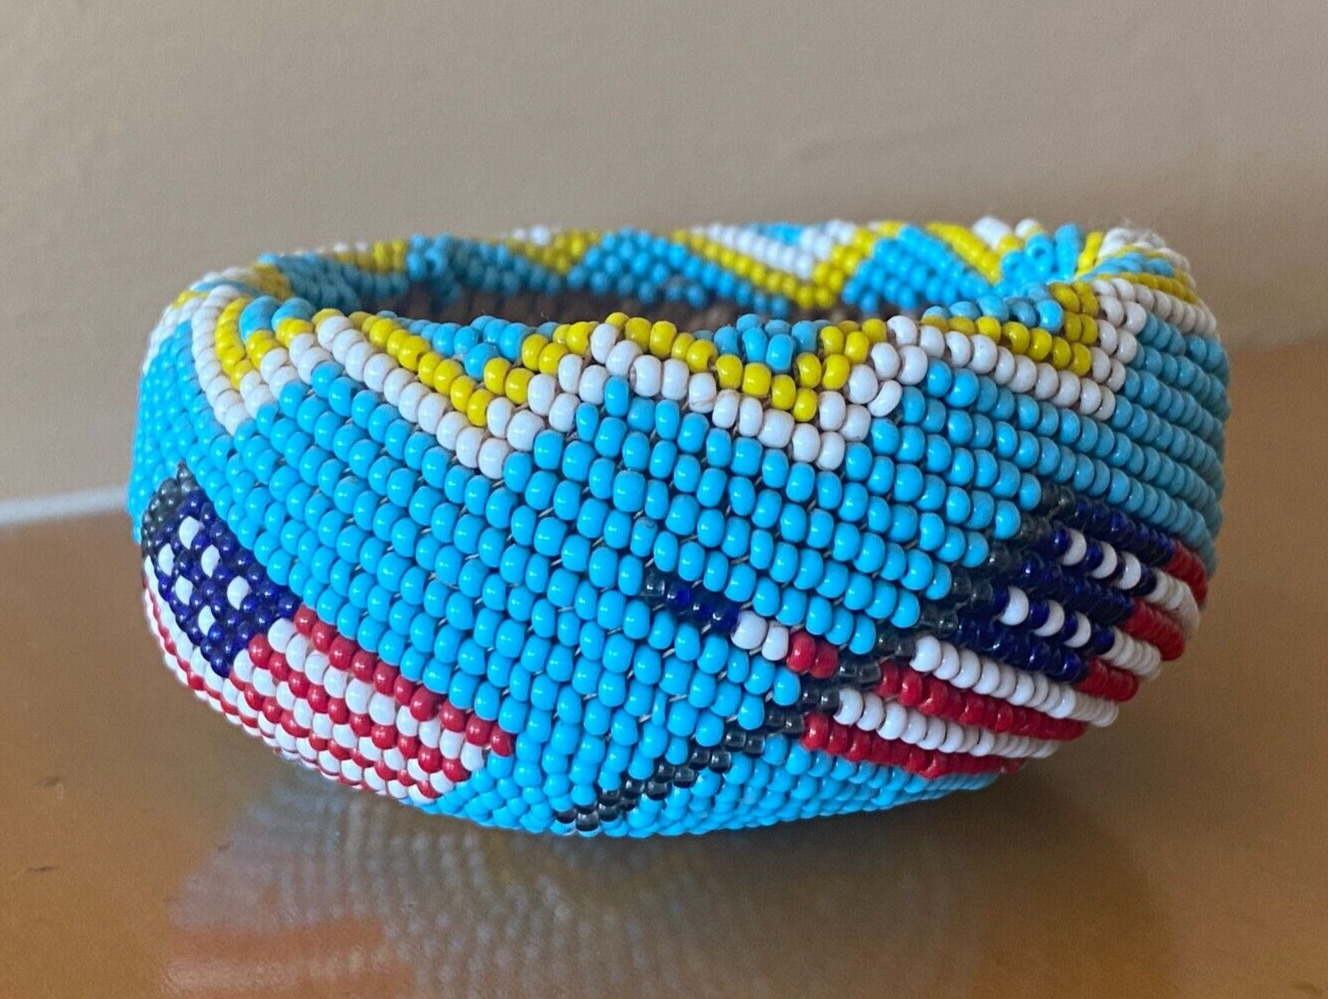 Native American Paiute Beaded Basket Featuring American Flag